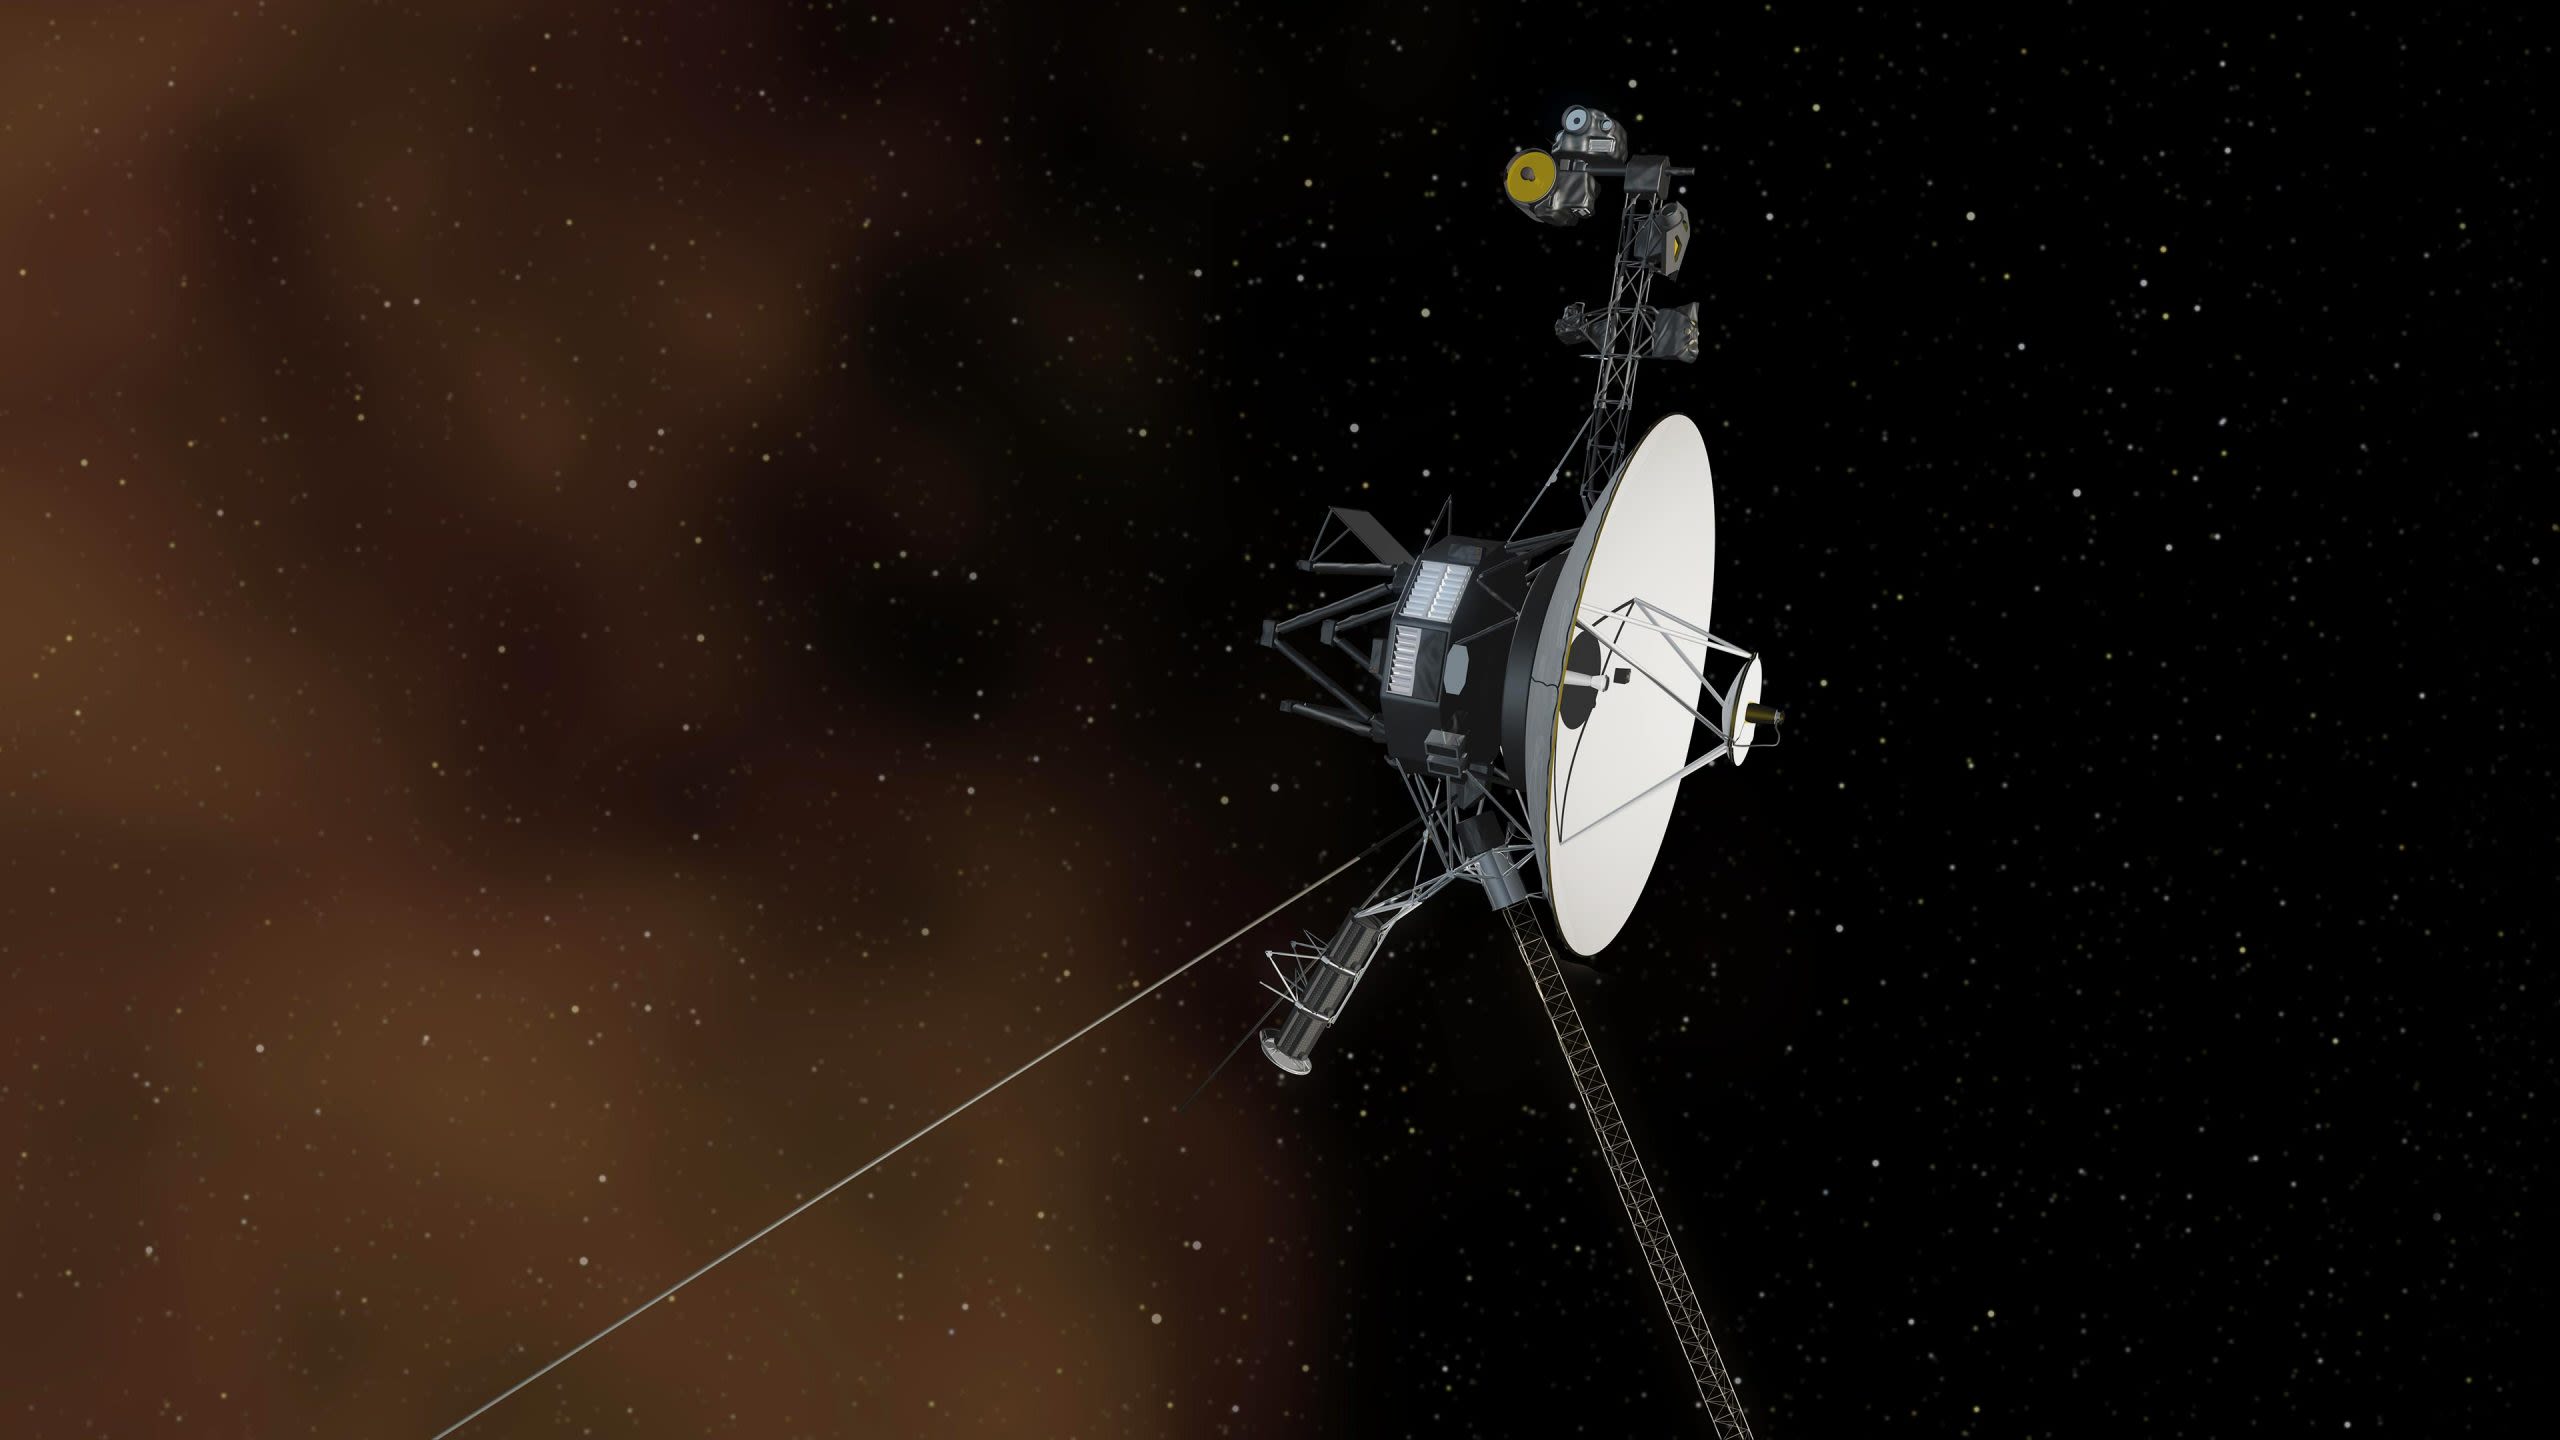 Fresh Data From the Cosmos: NASA’s Voyager 1 Resumes Sending Science Data From 15 Billion Miles Away